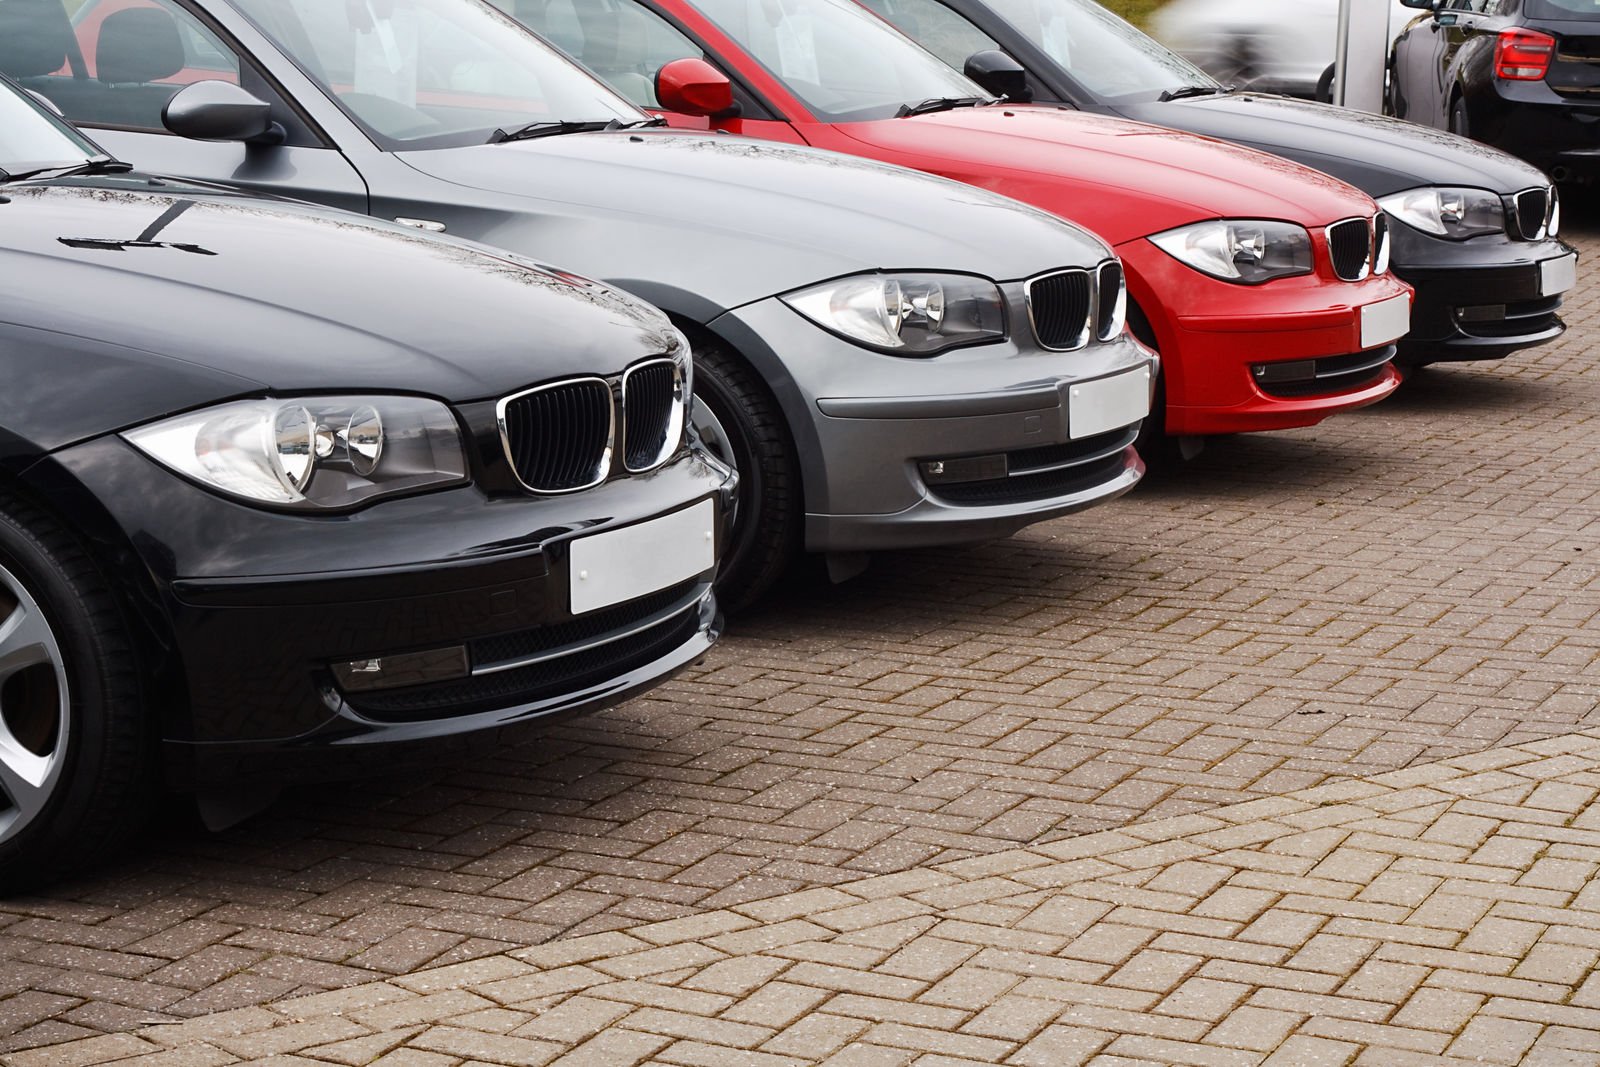 How long after buying a car do you need to get insurance coverage?